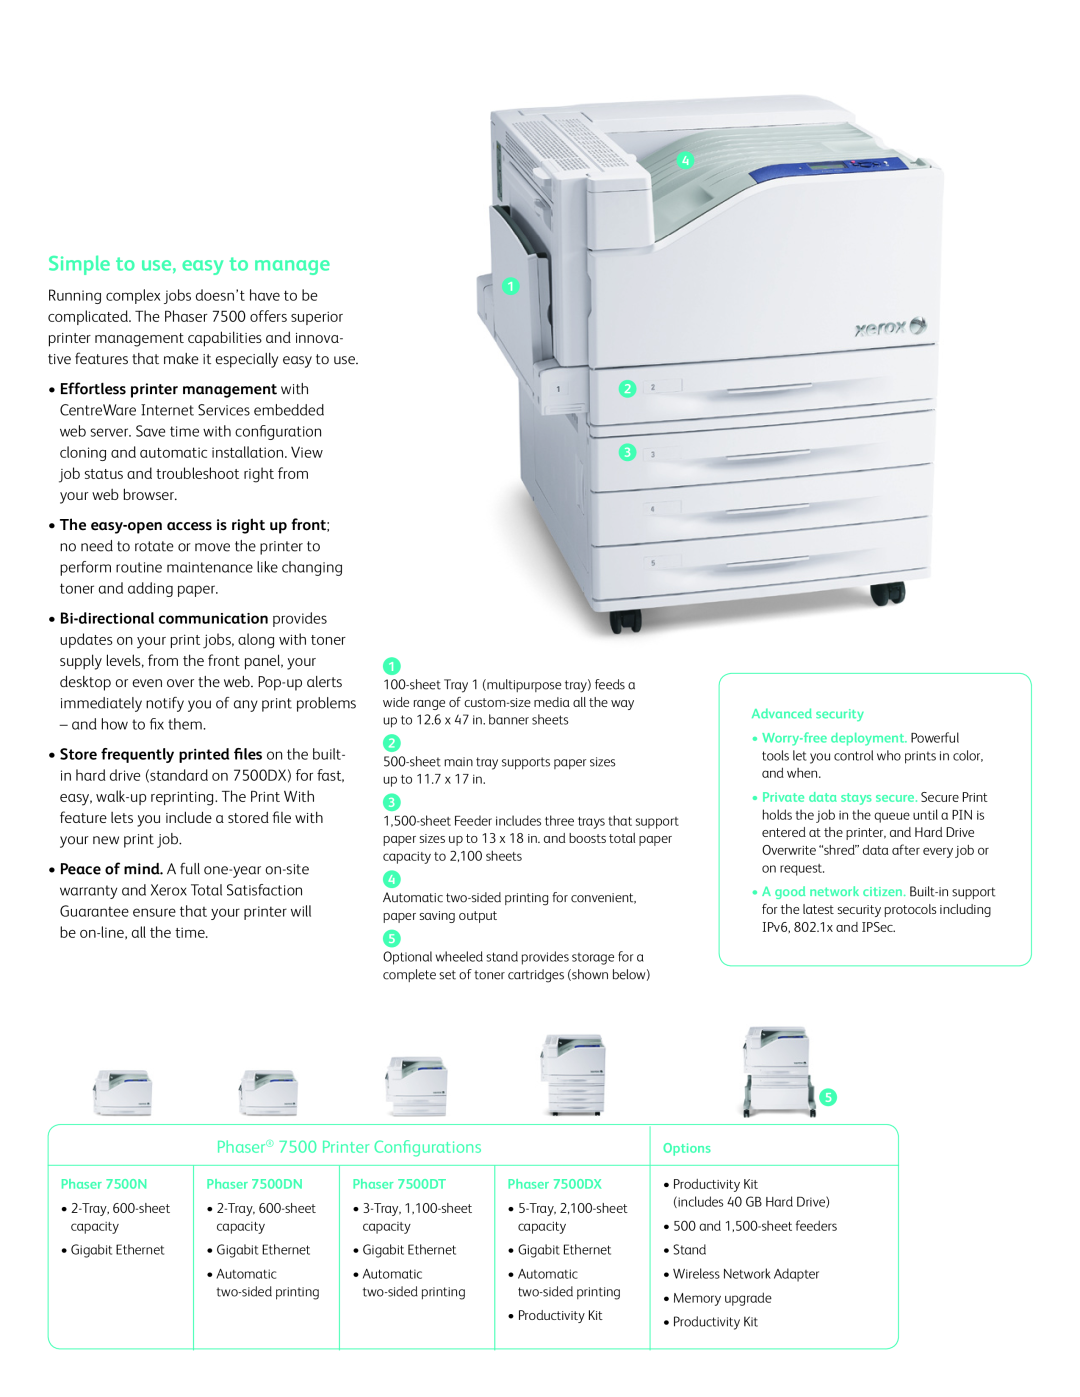 Xerox 7500DT Simple to use, easy to manage, Phaser 7500 Printer Configurations, Advanced security, Options, Phaser 7500N 